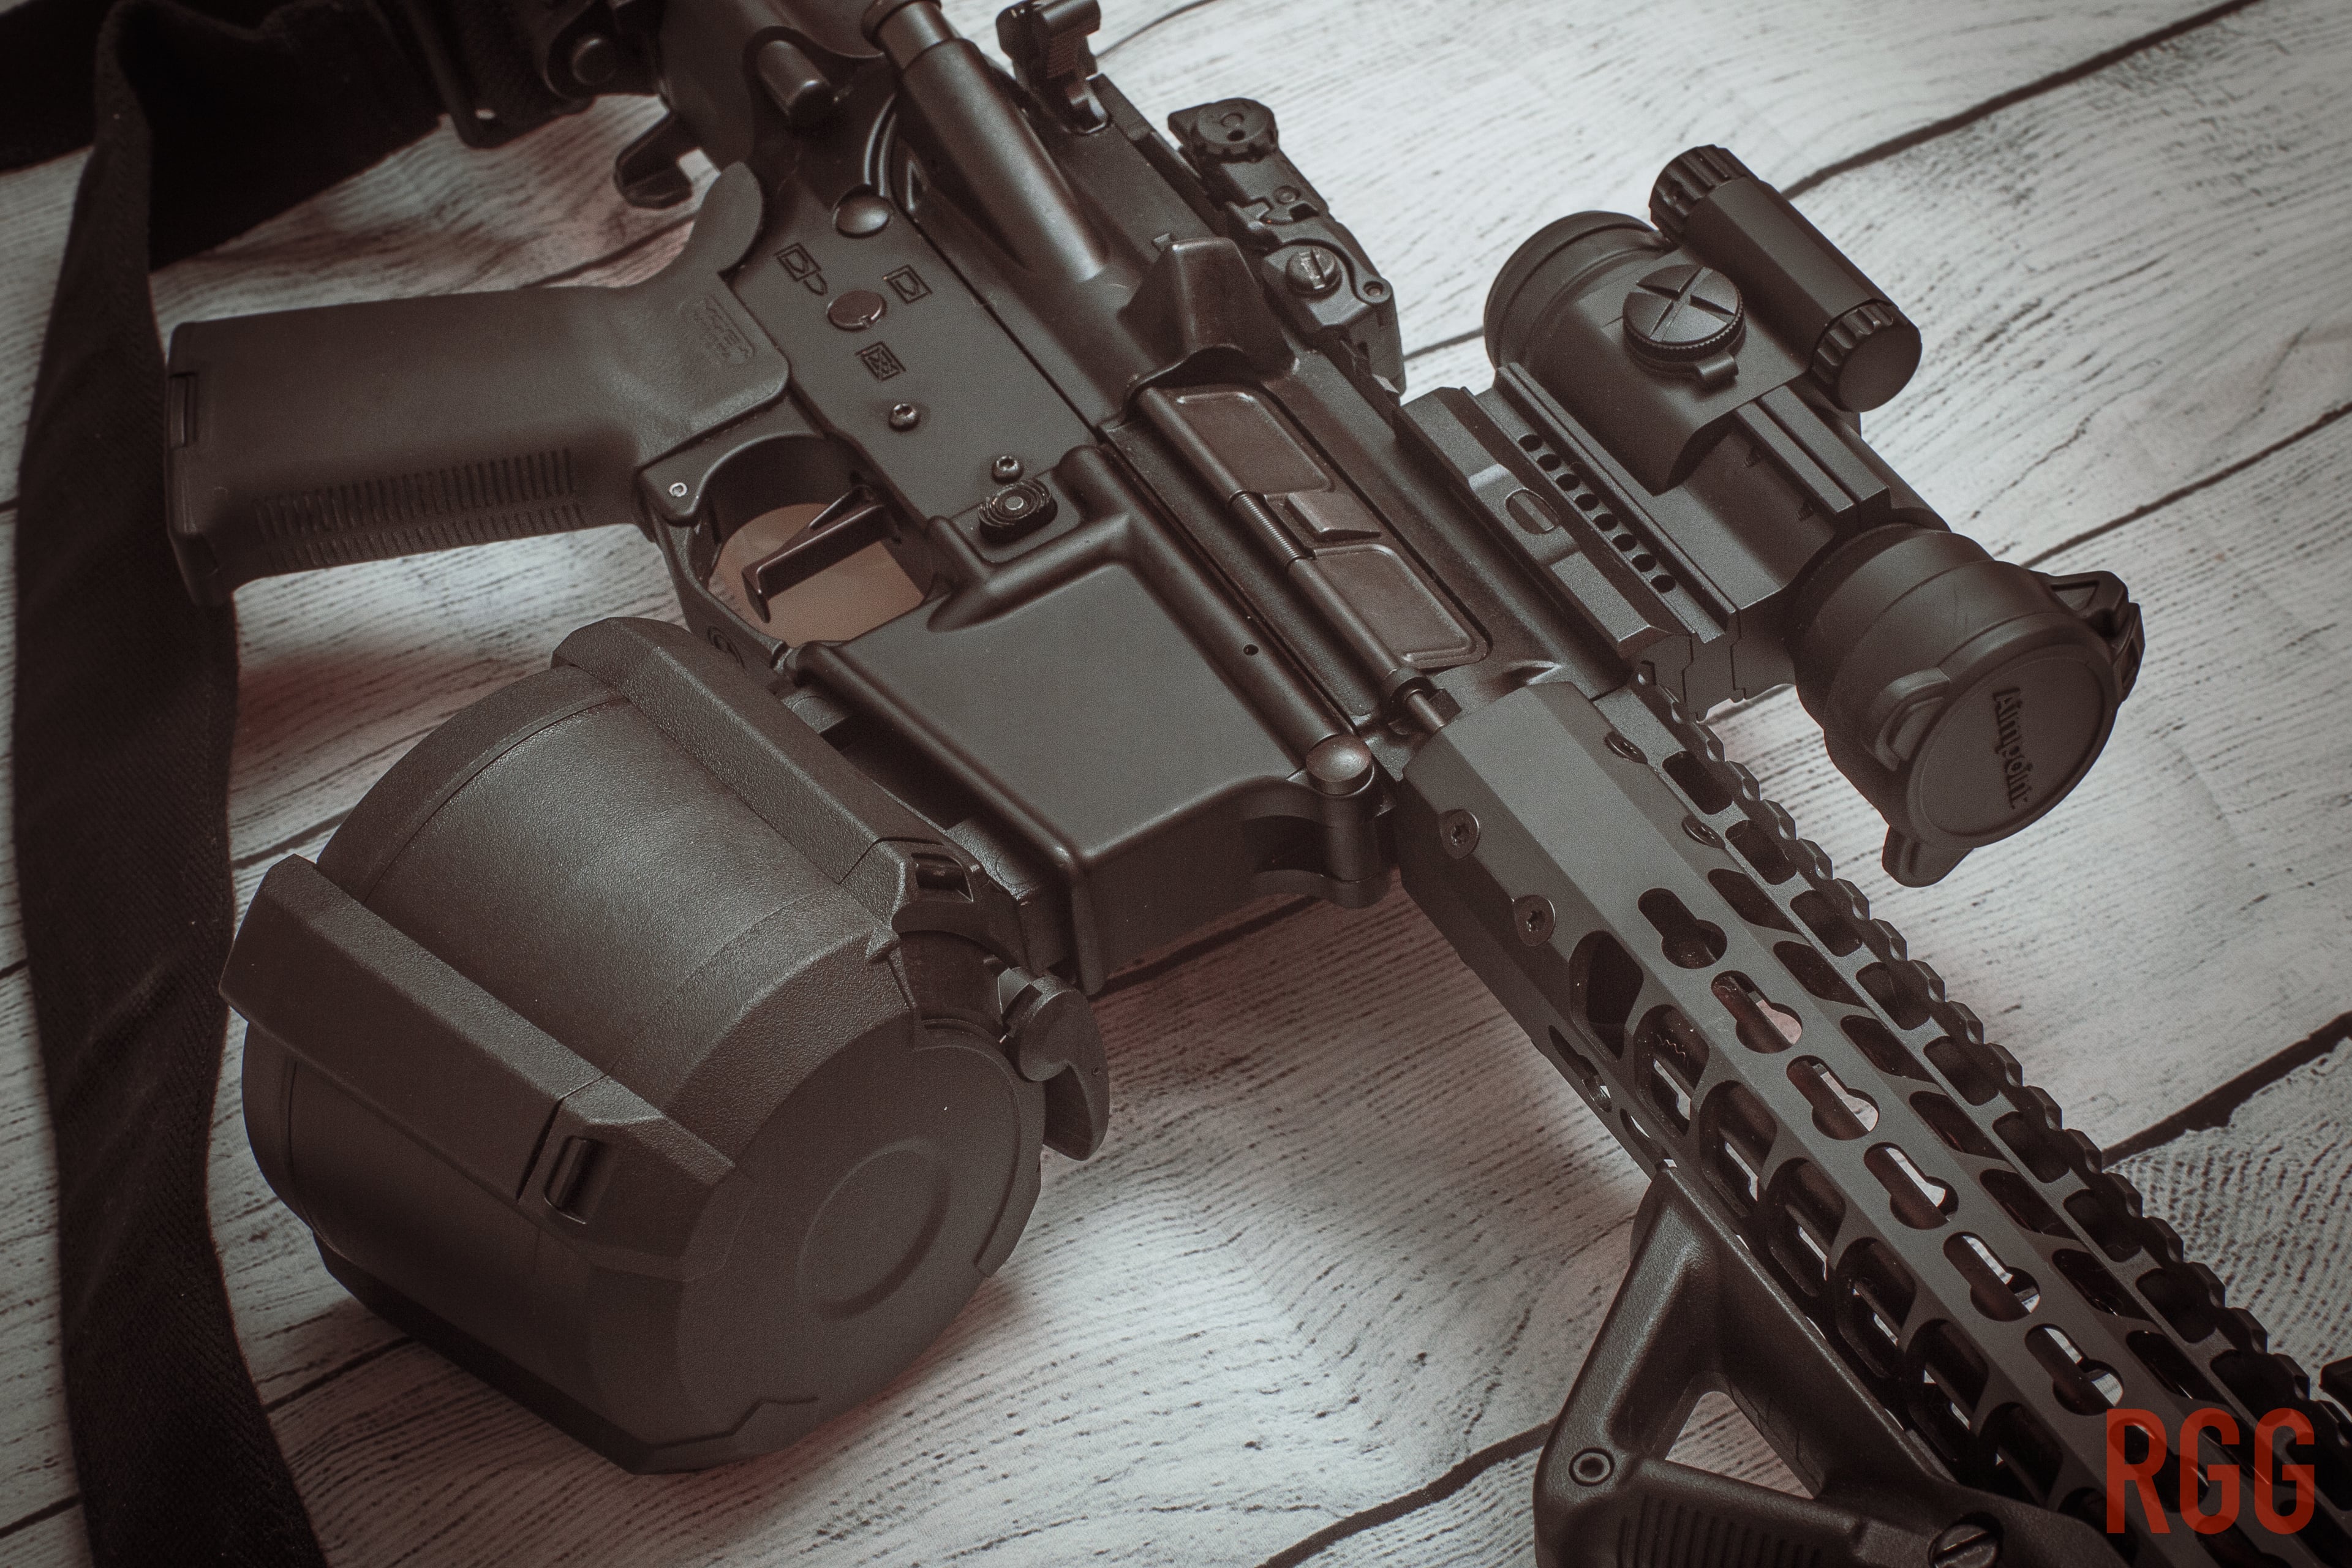 You need a Magpul D60 drum in your life.